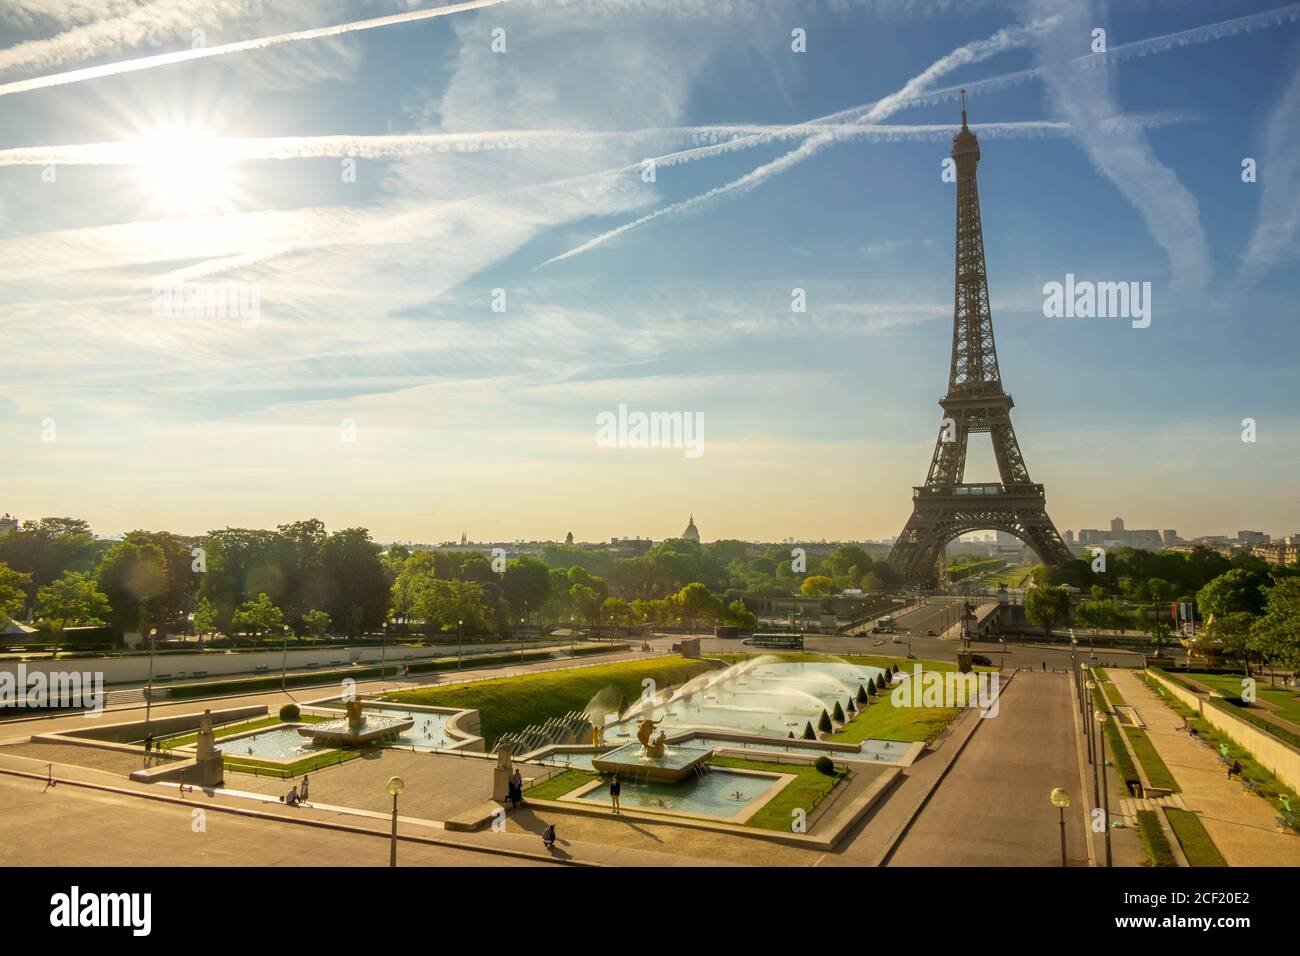 France. Paris. The Eiffel Tower and the fountain in the gardens of the Trocadero. Sunny morning. Stock Photo